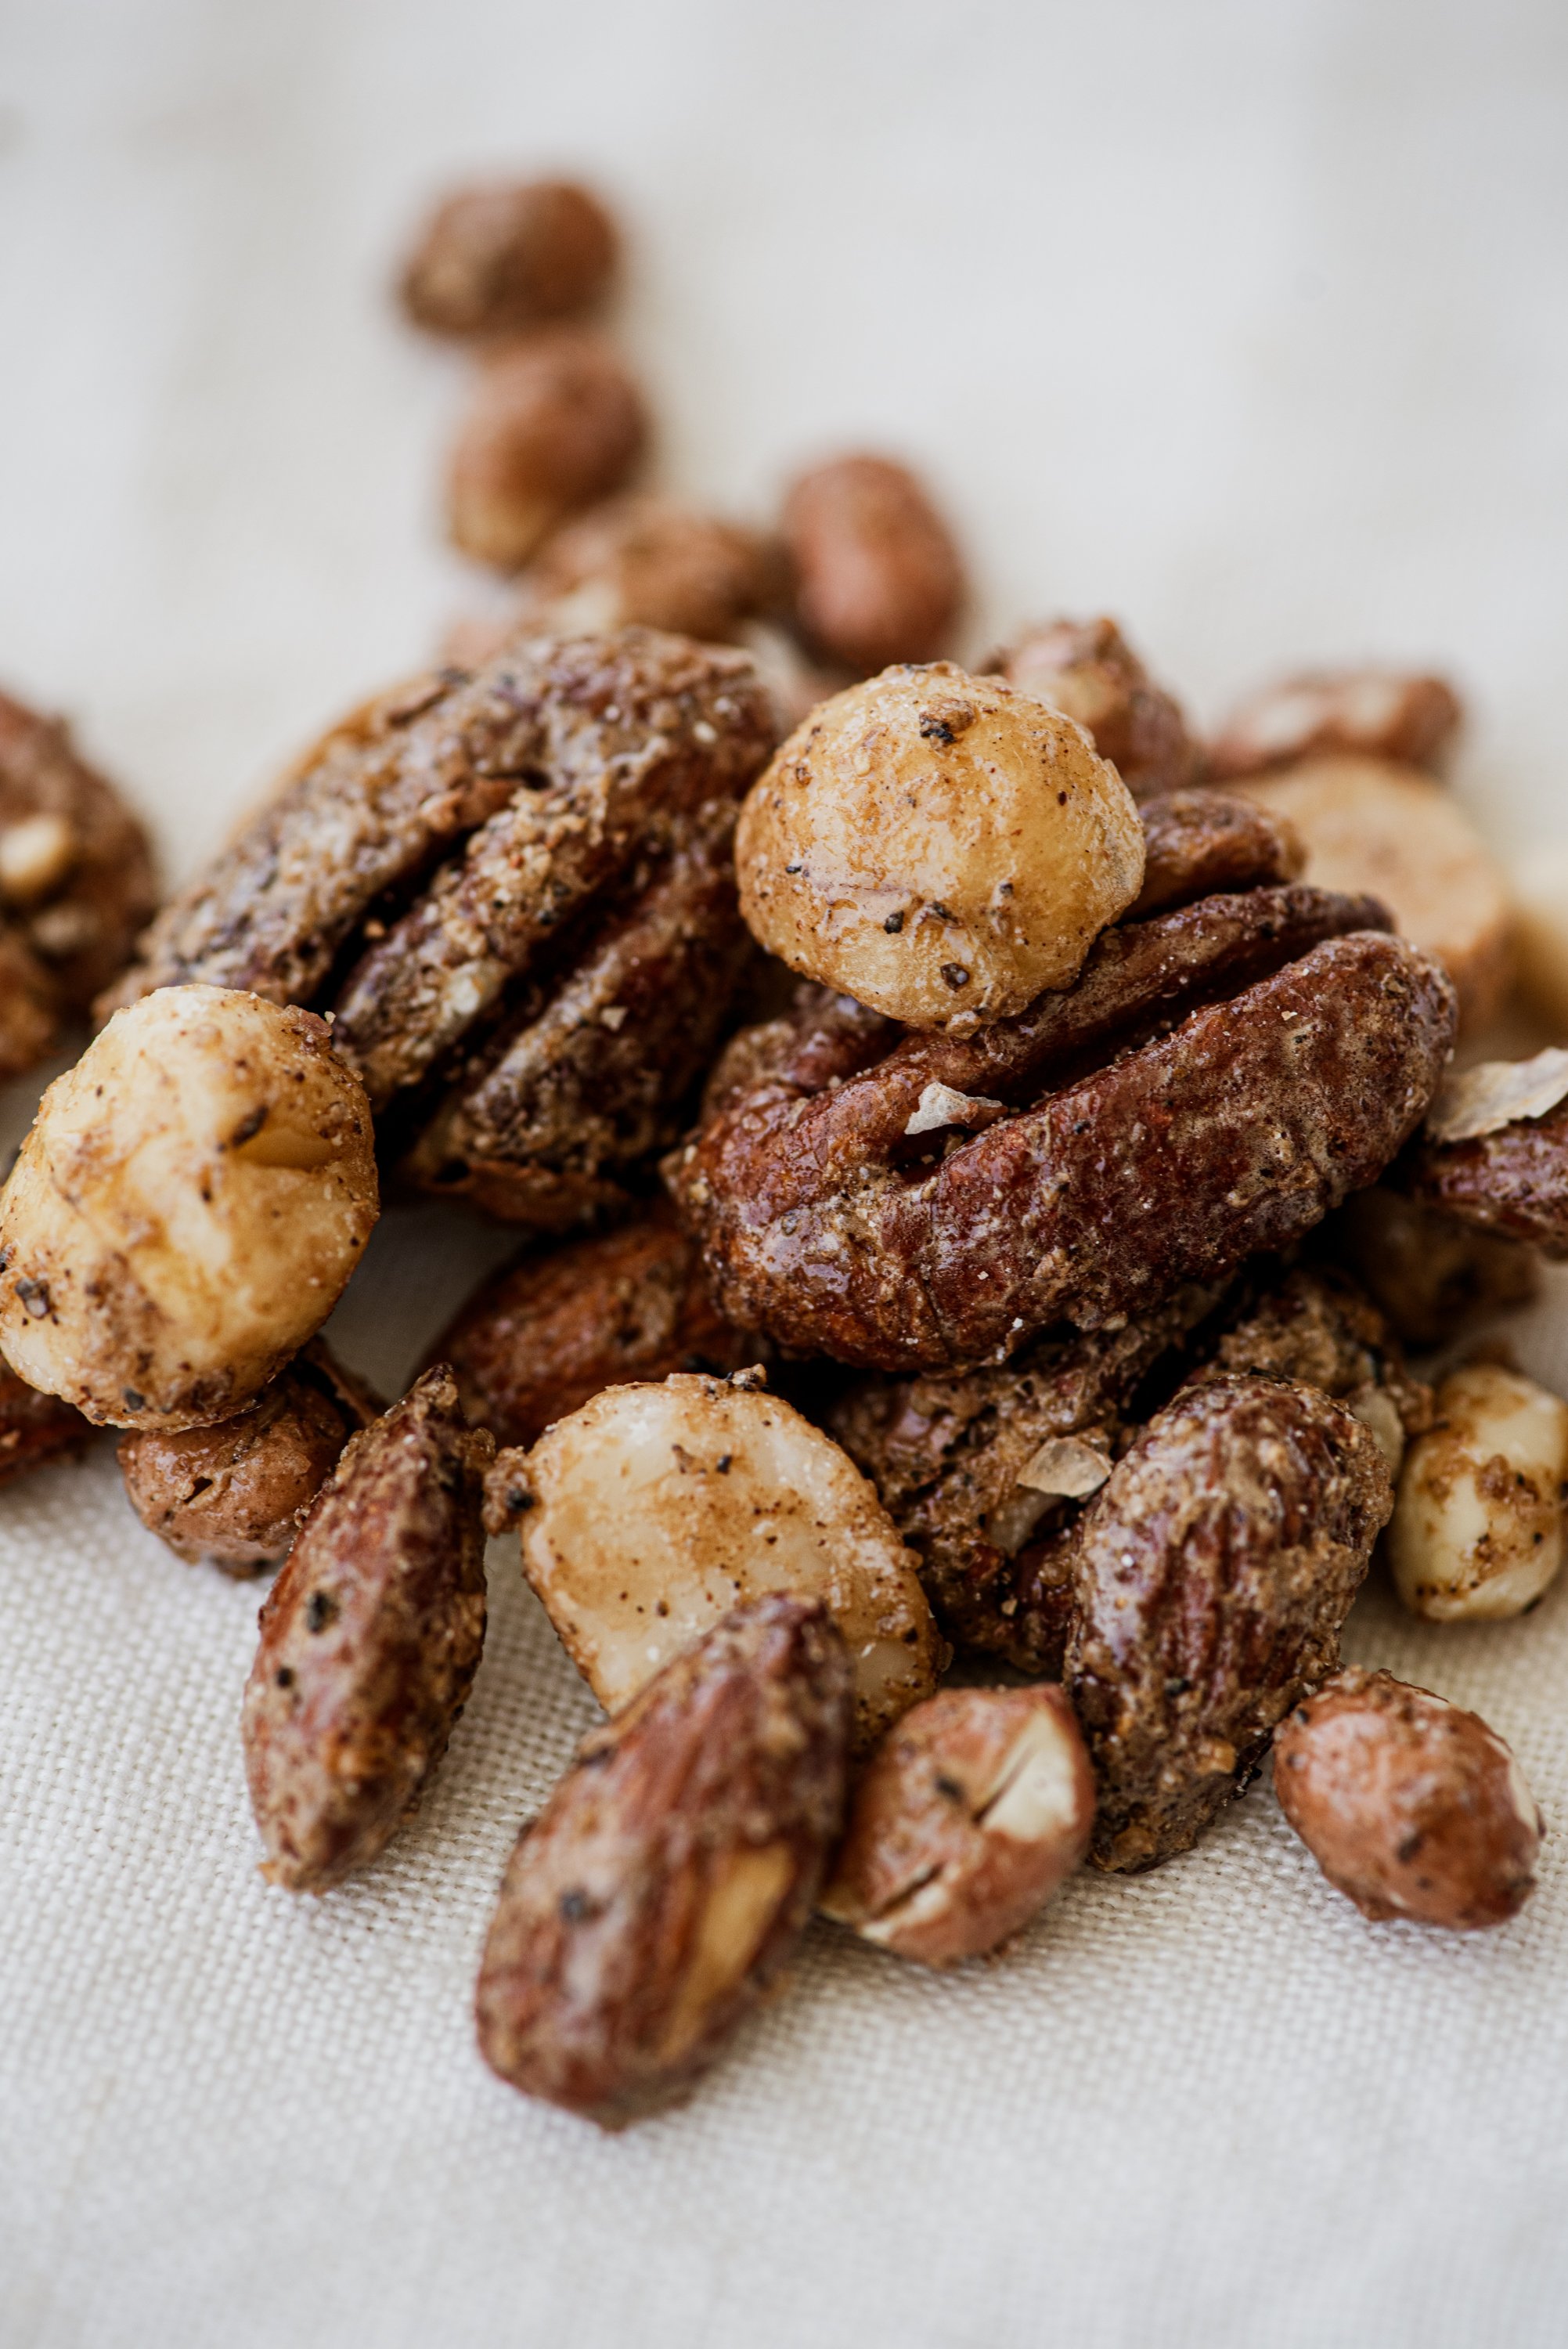 MIXED SPICED NUTS